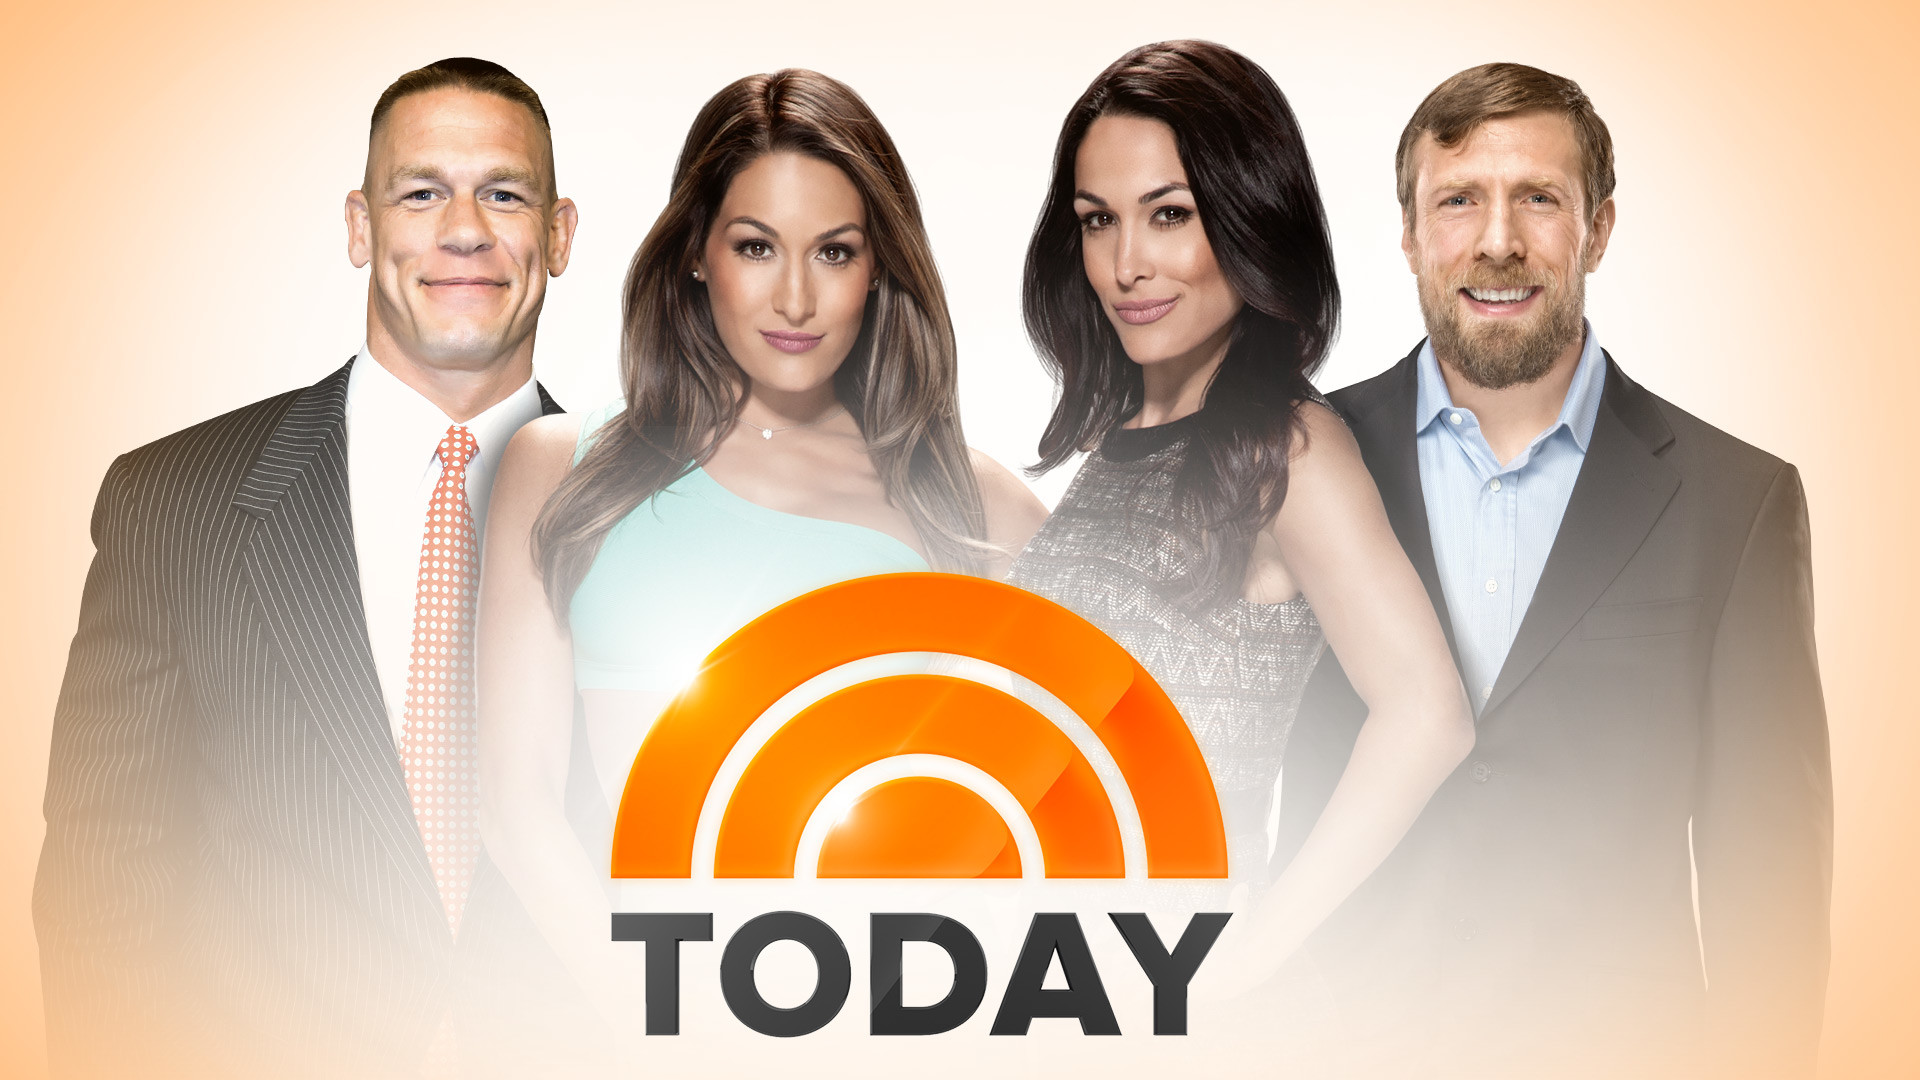 1920x1080 John Cena, Daniel Bryan and The Bella Twins to appear on 'TODAY' this Friday